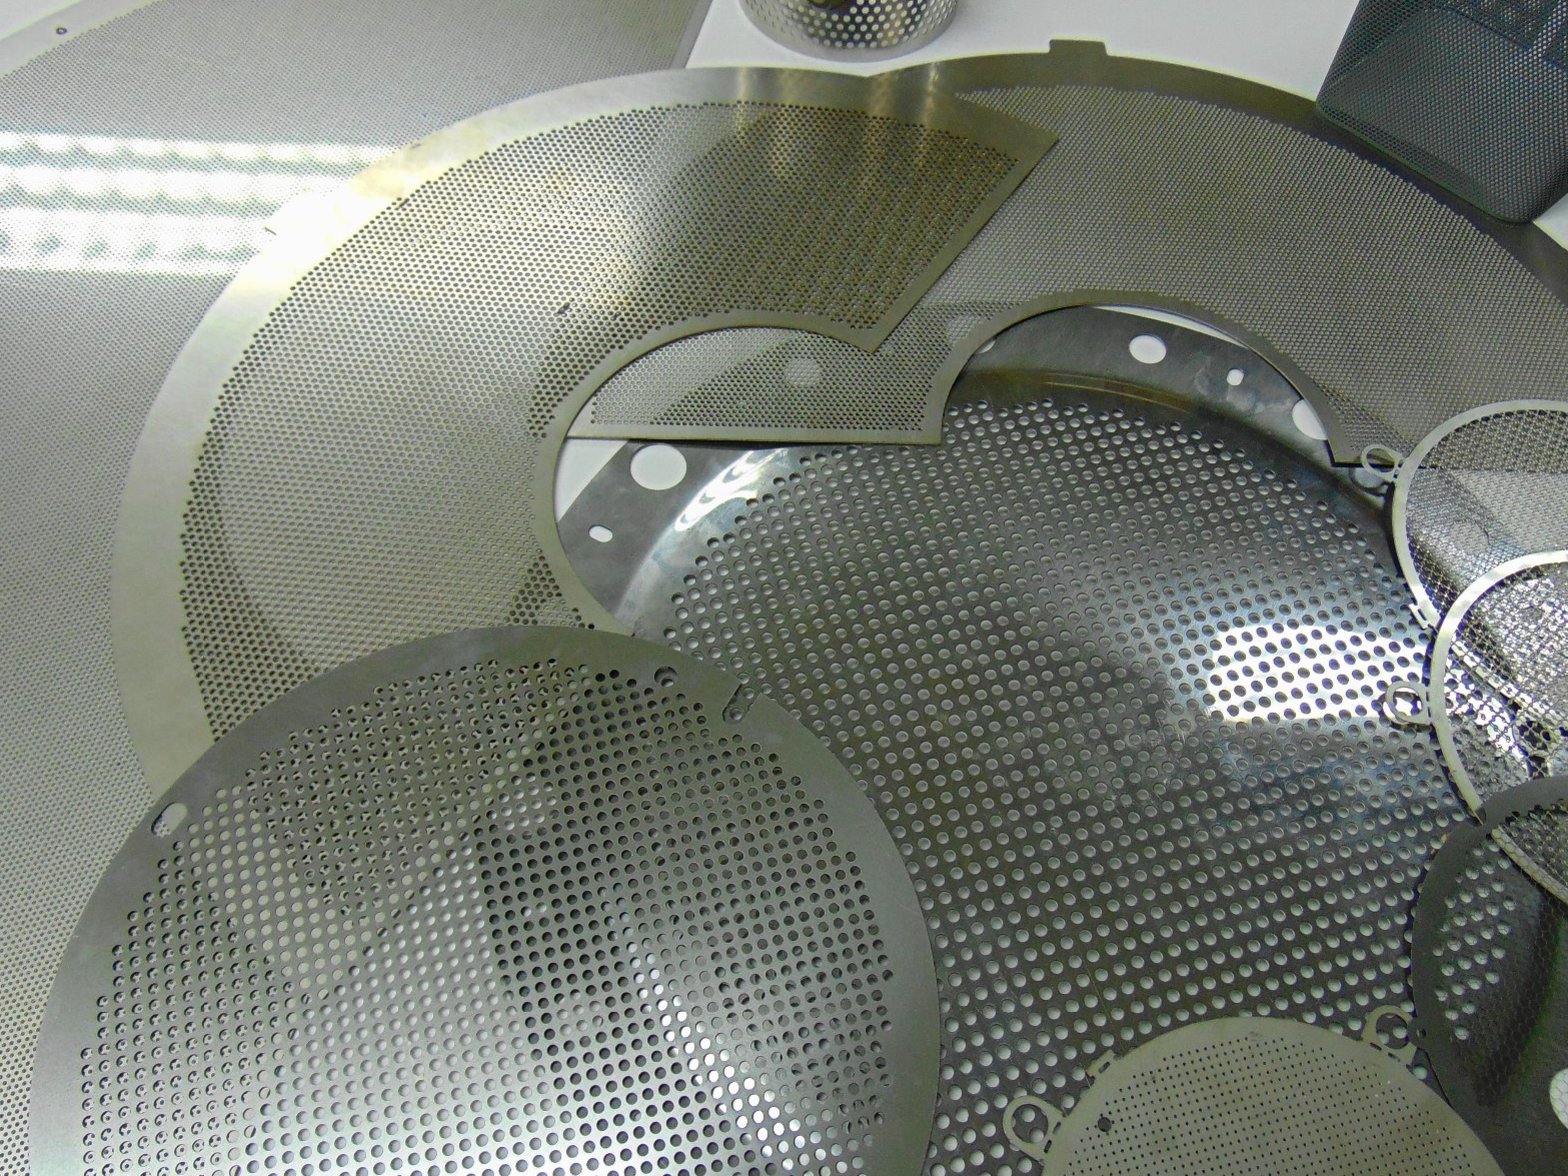 various filters and meshes manufactured by the photofabrication process the best way to make etched components and meshes.